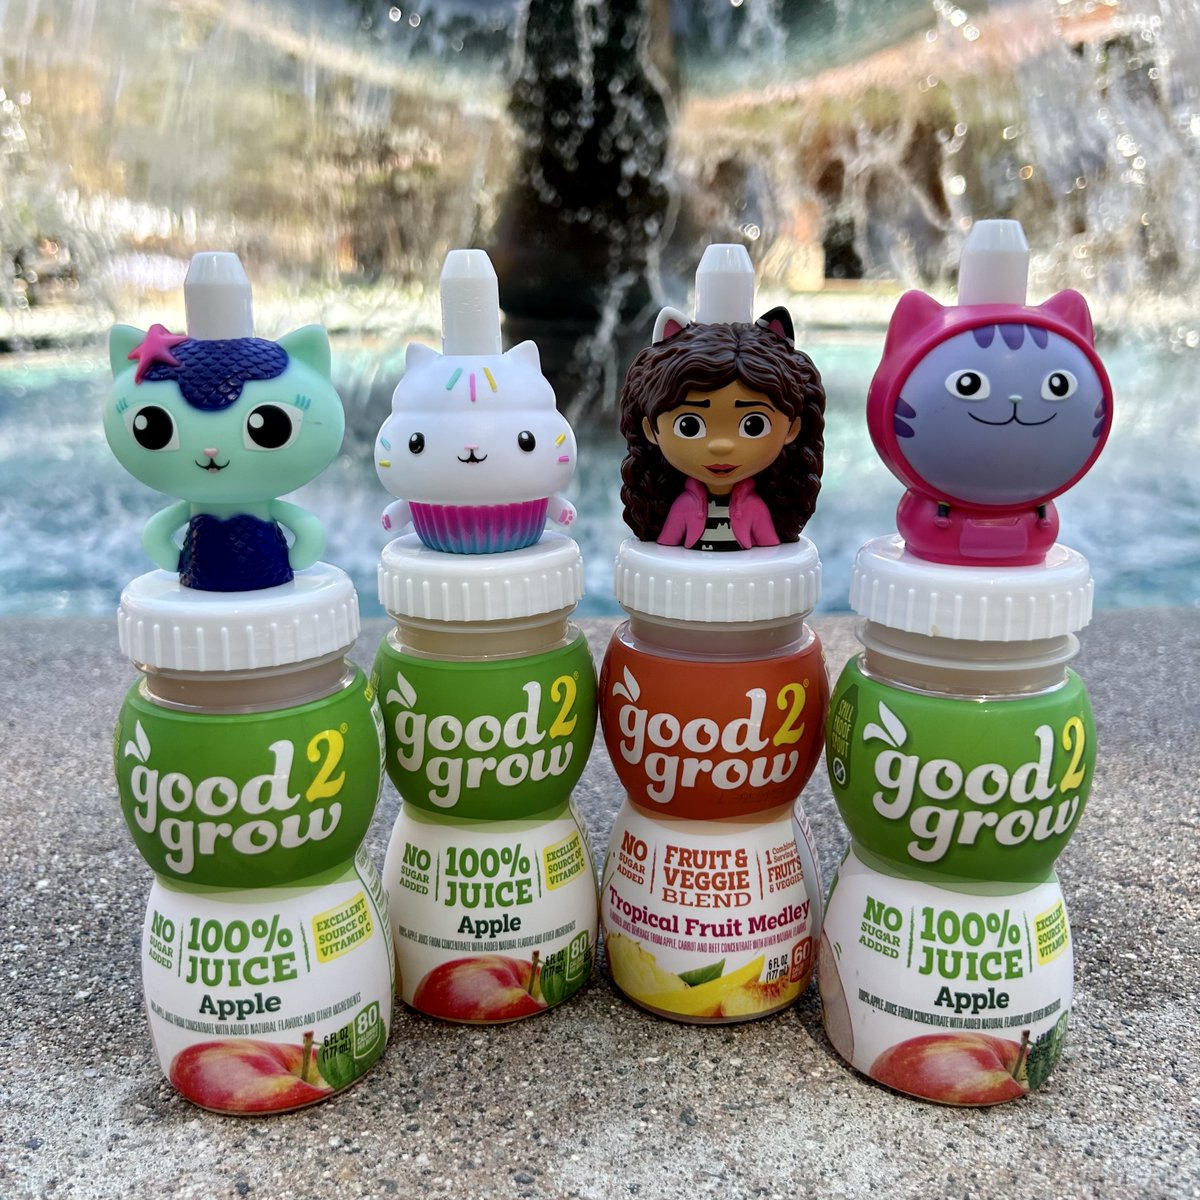 The perfect drink to accompany any snacky you may find in your packy! 🧃 @good2growdrinks featuring #GabbysDollhouse spill-proof spouts are available now at your local grocery store! #good2grow